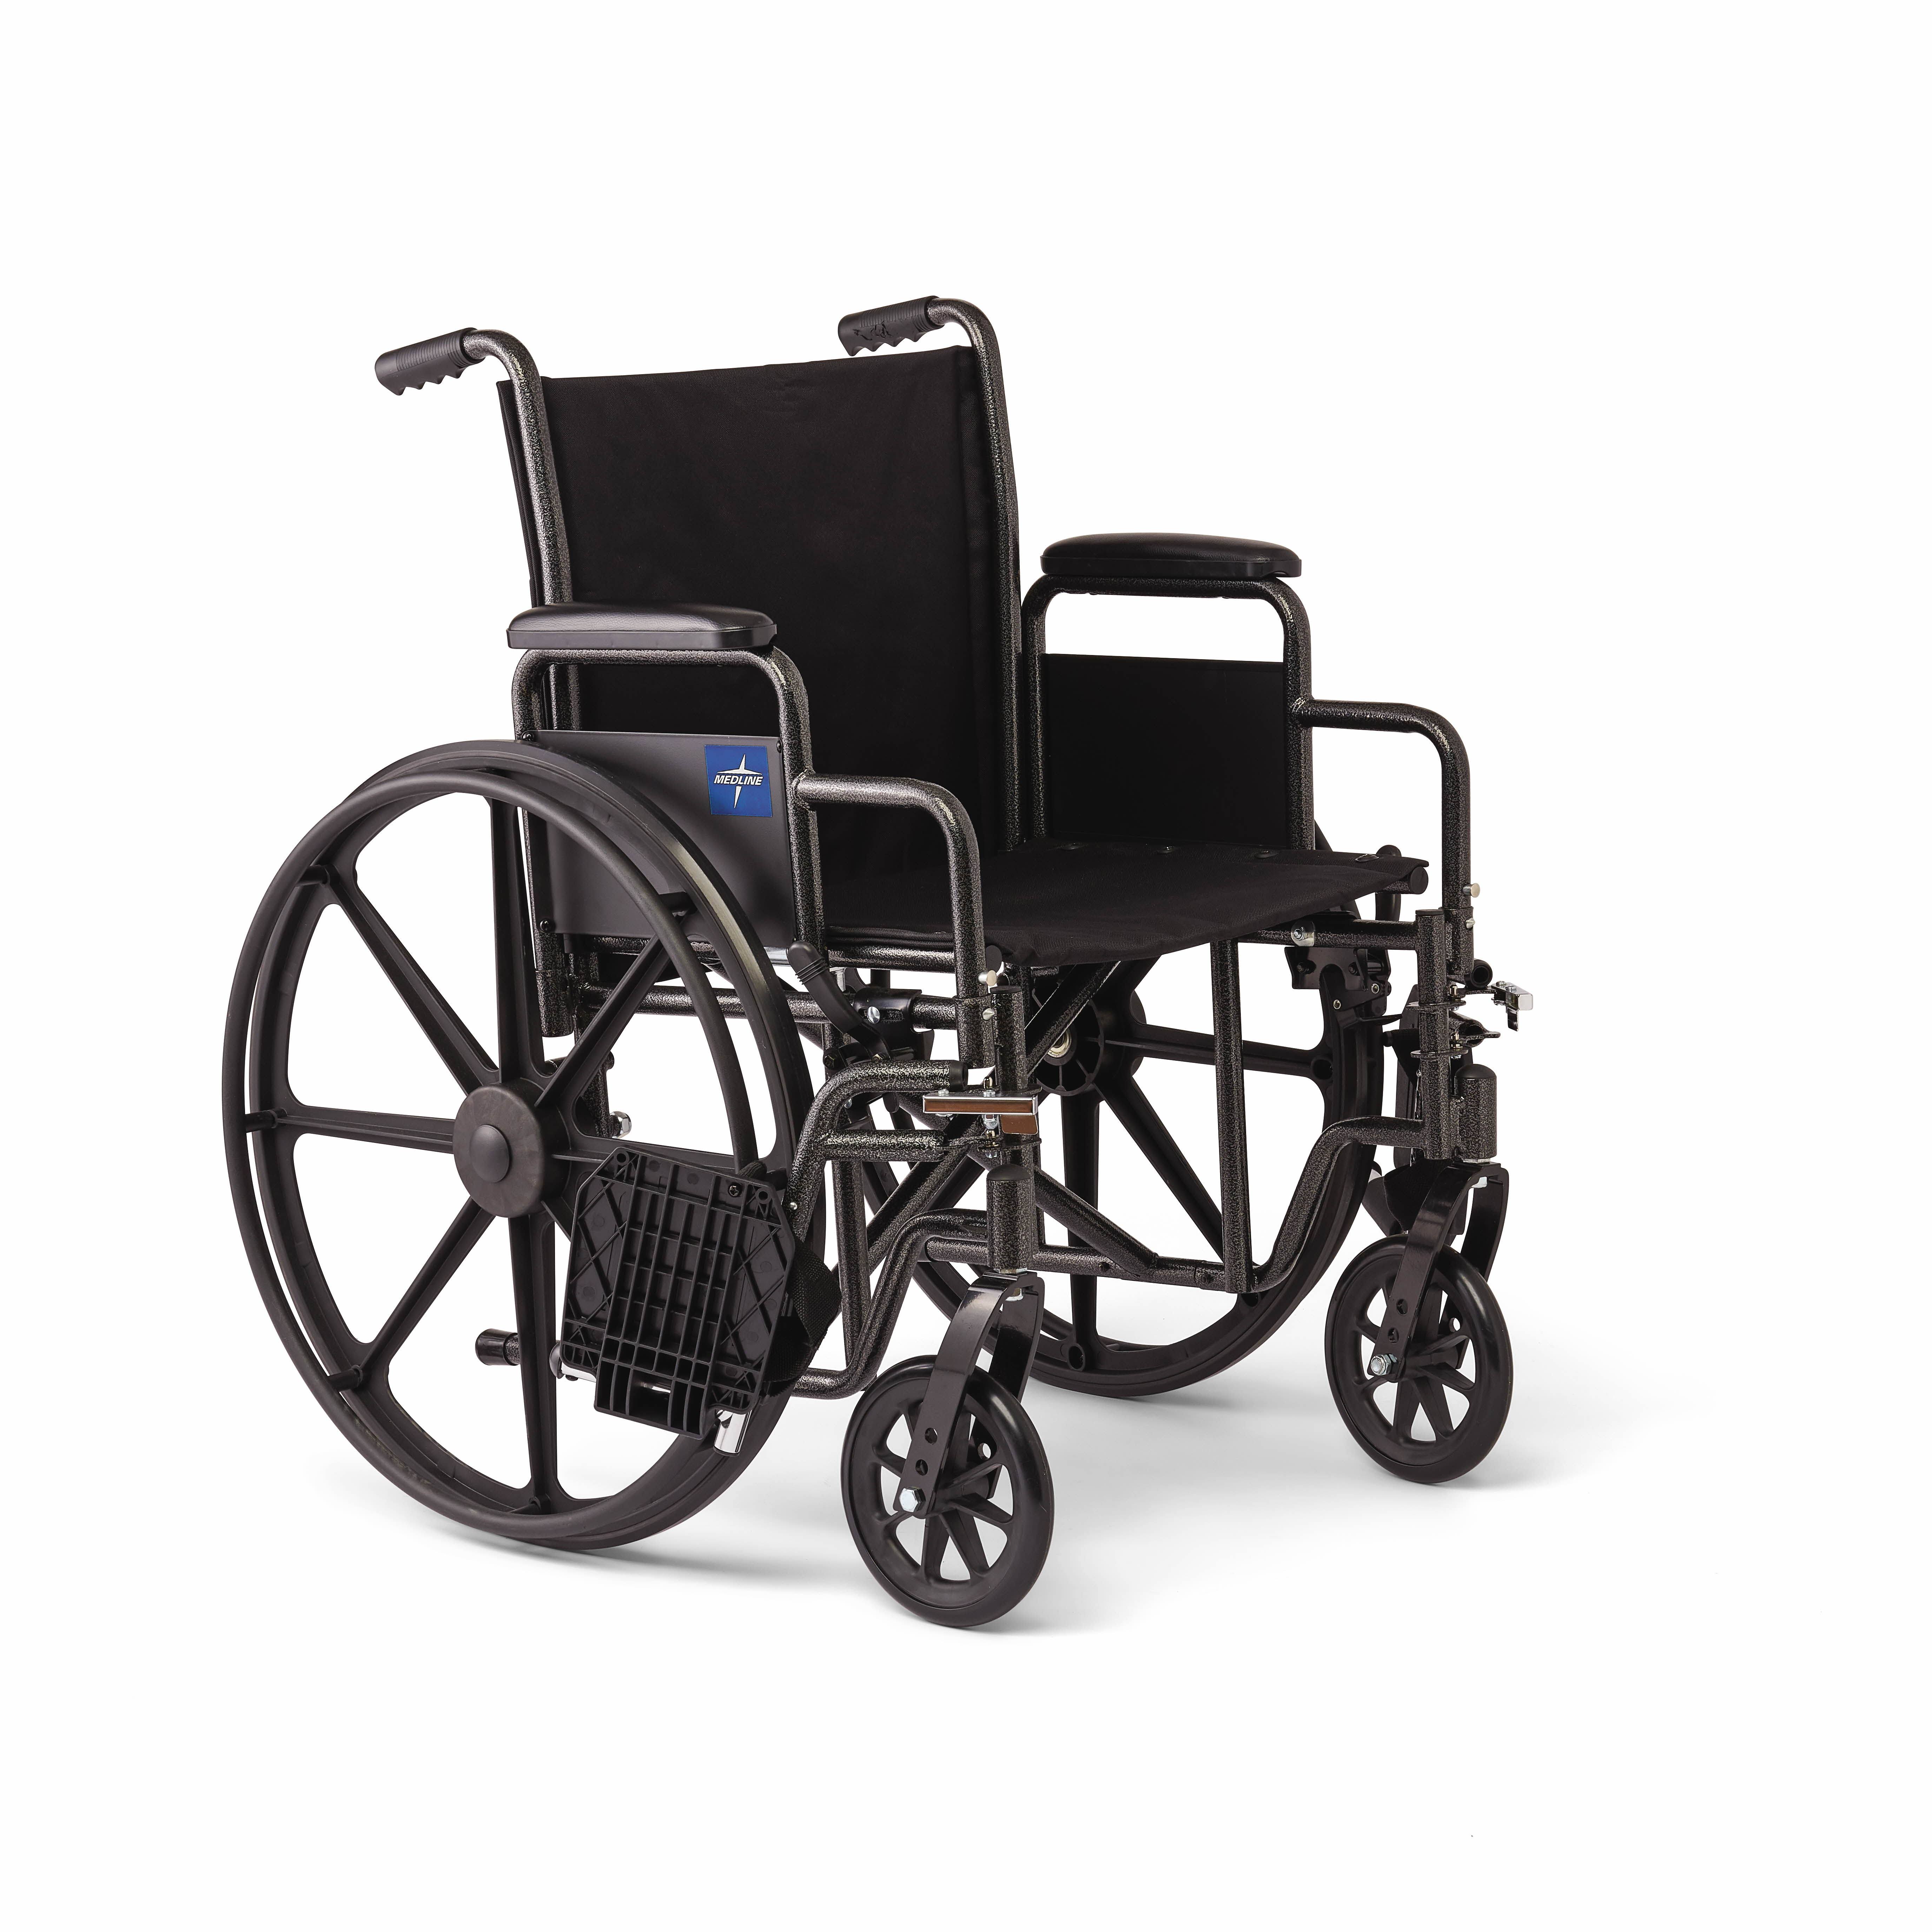 Medline Wheelchairs: 20" Wide K1 Basic Nylon Wheelchair with Swing-Back Desk-Length Arms and Swing-Away Leg Rests